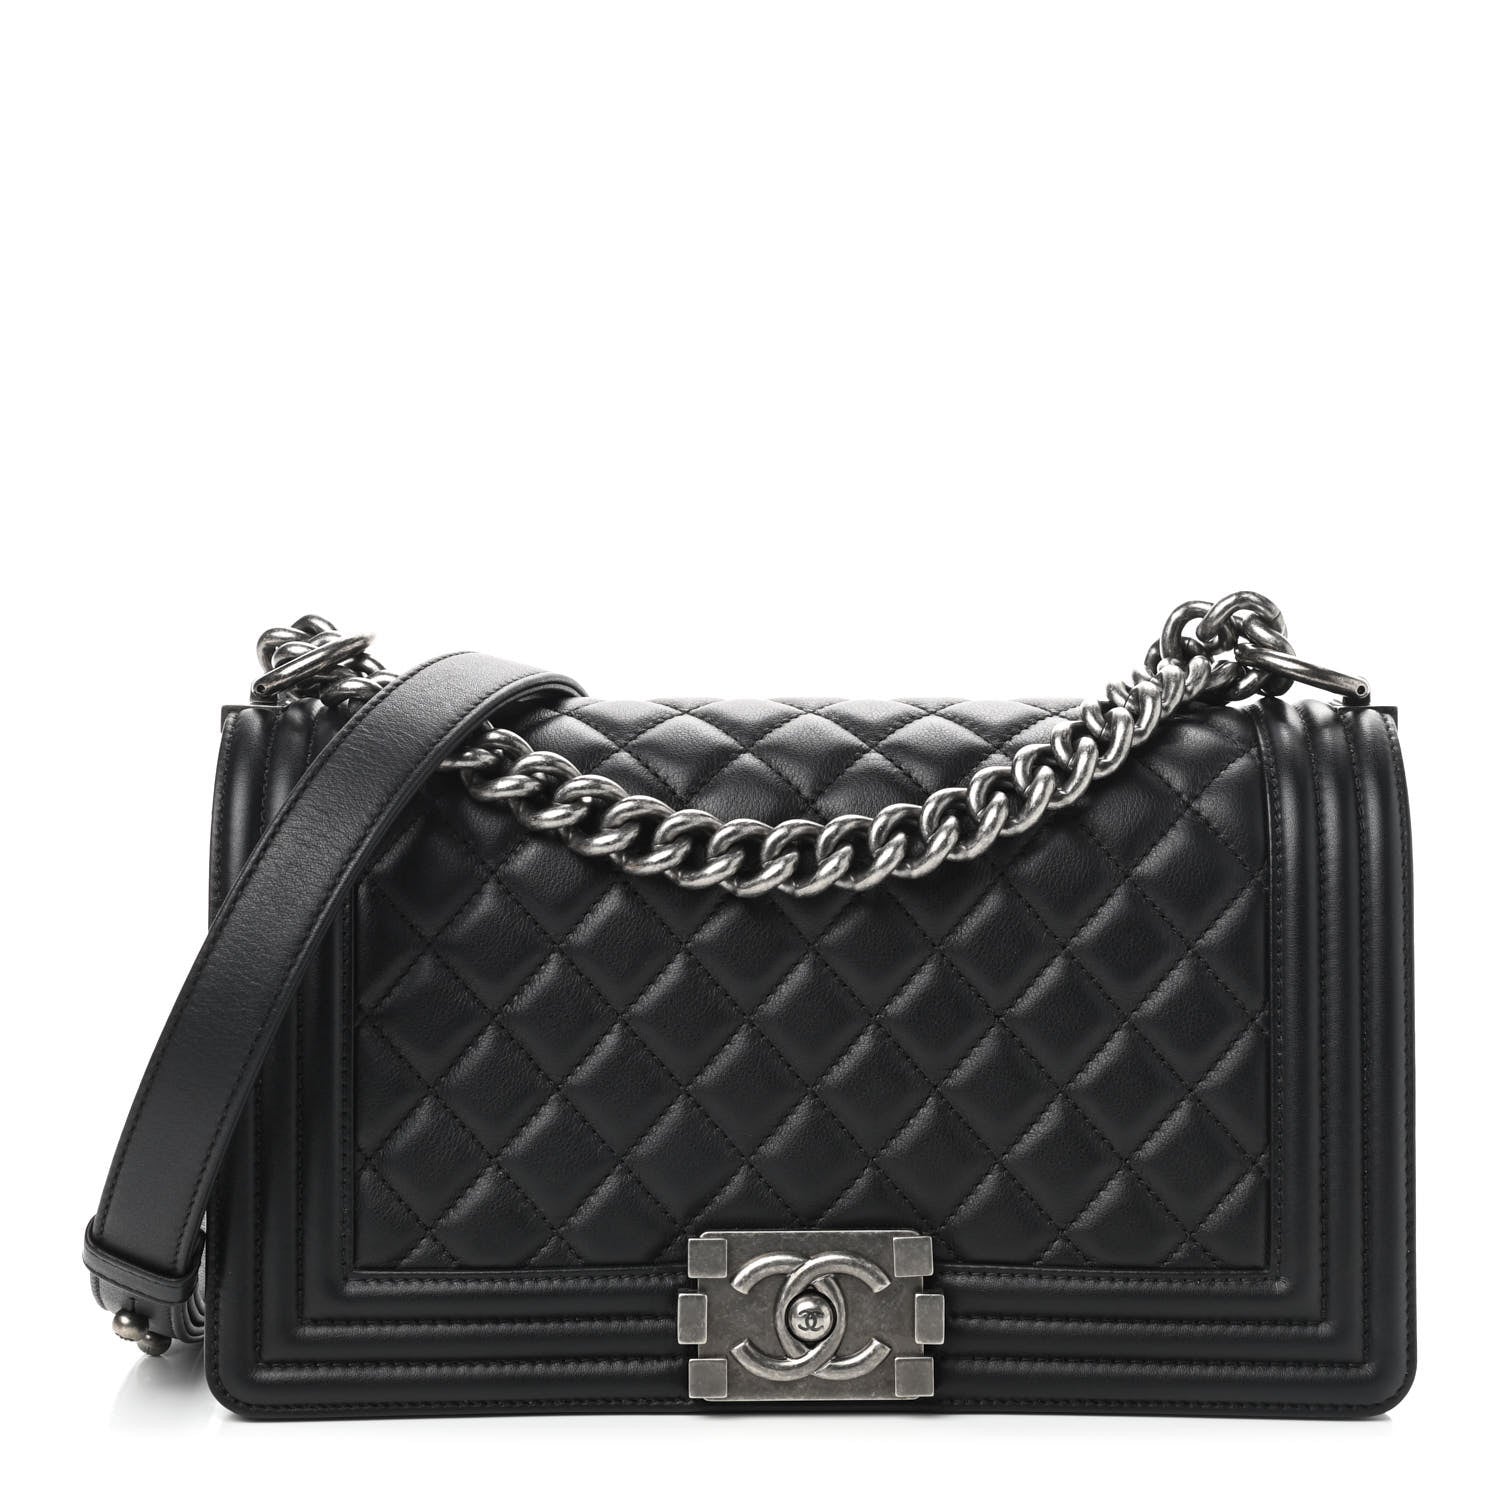 Prada Crossbody Cahier Quilted Metallic Silver Leather Shoulder Bag -  MyDesignerly